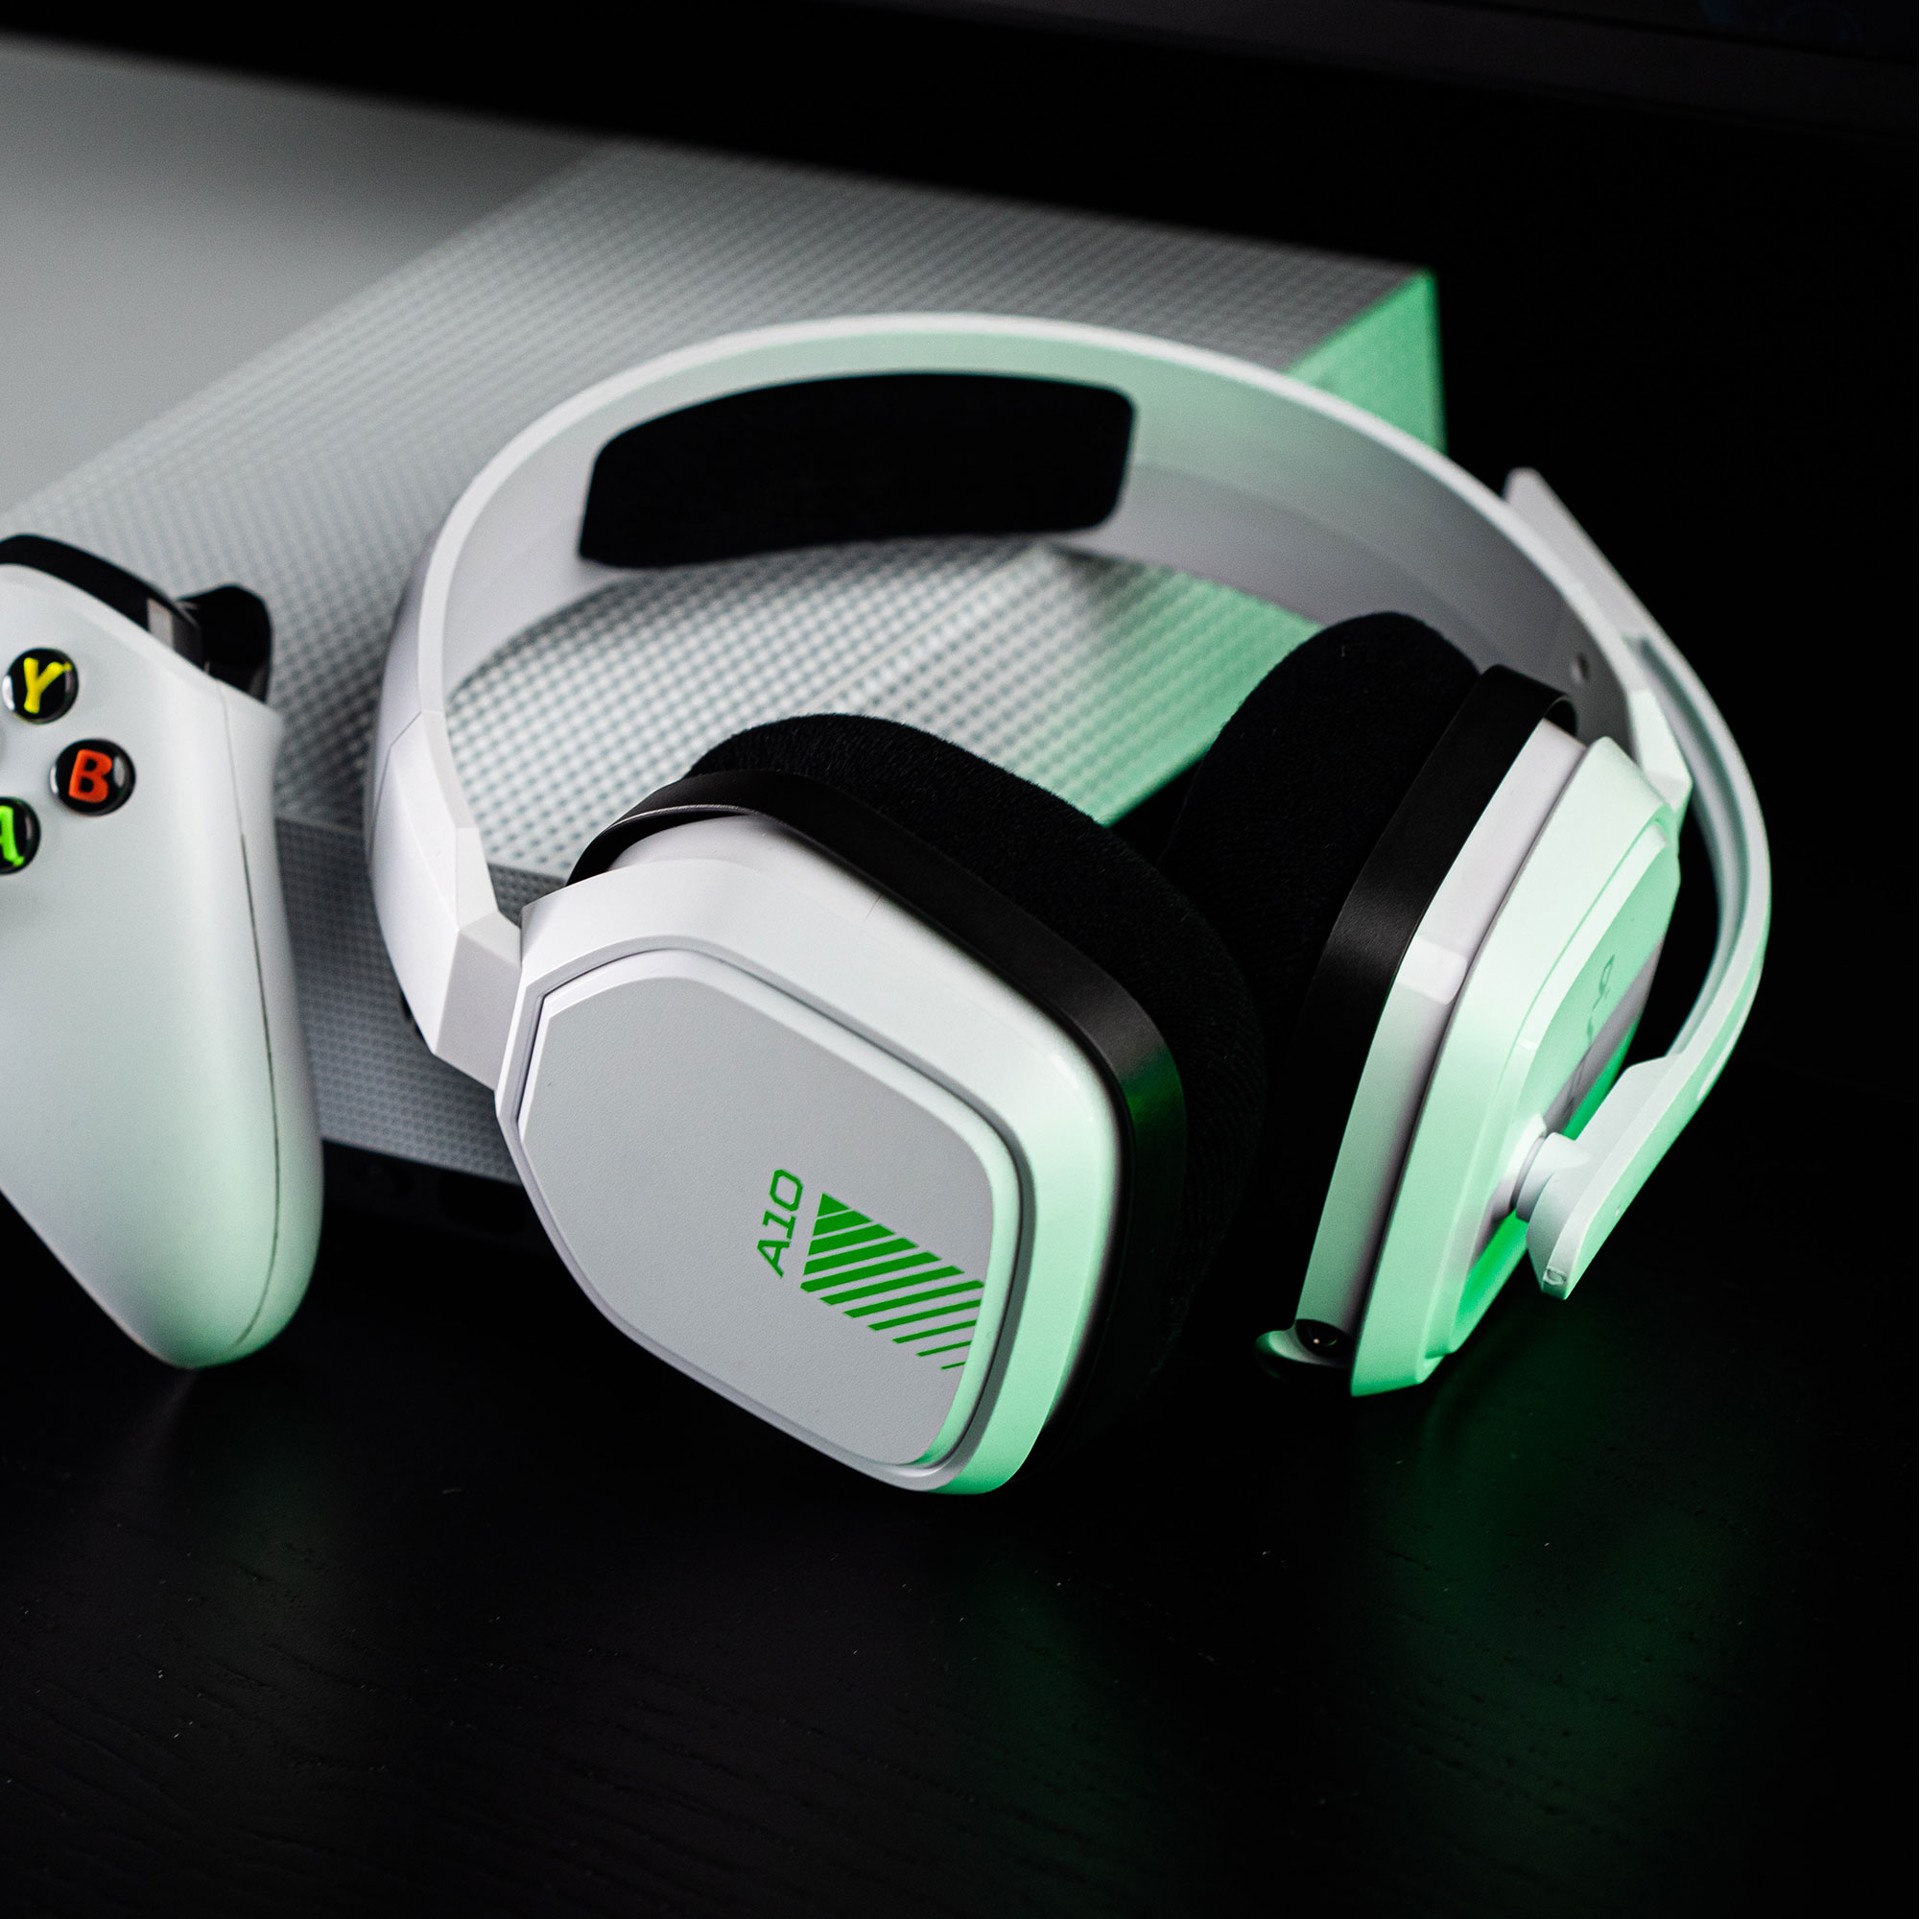 Buy Astro A10 Headset For Xbox One White Free Shipping